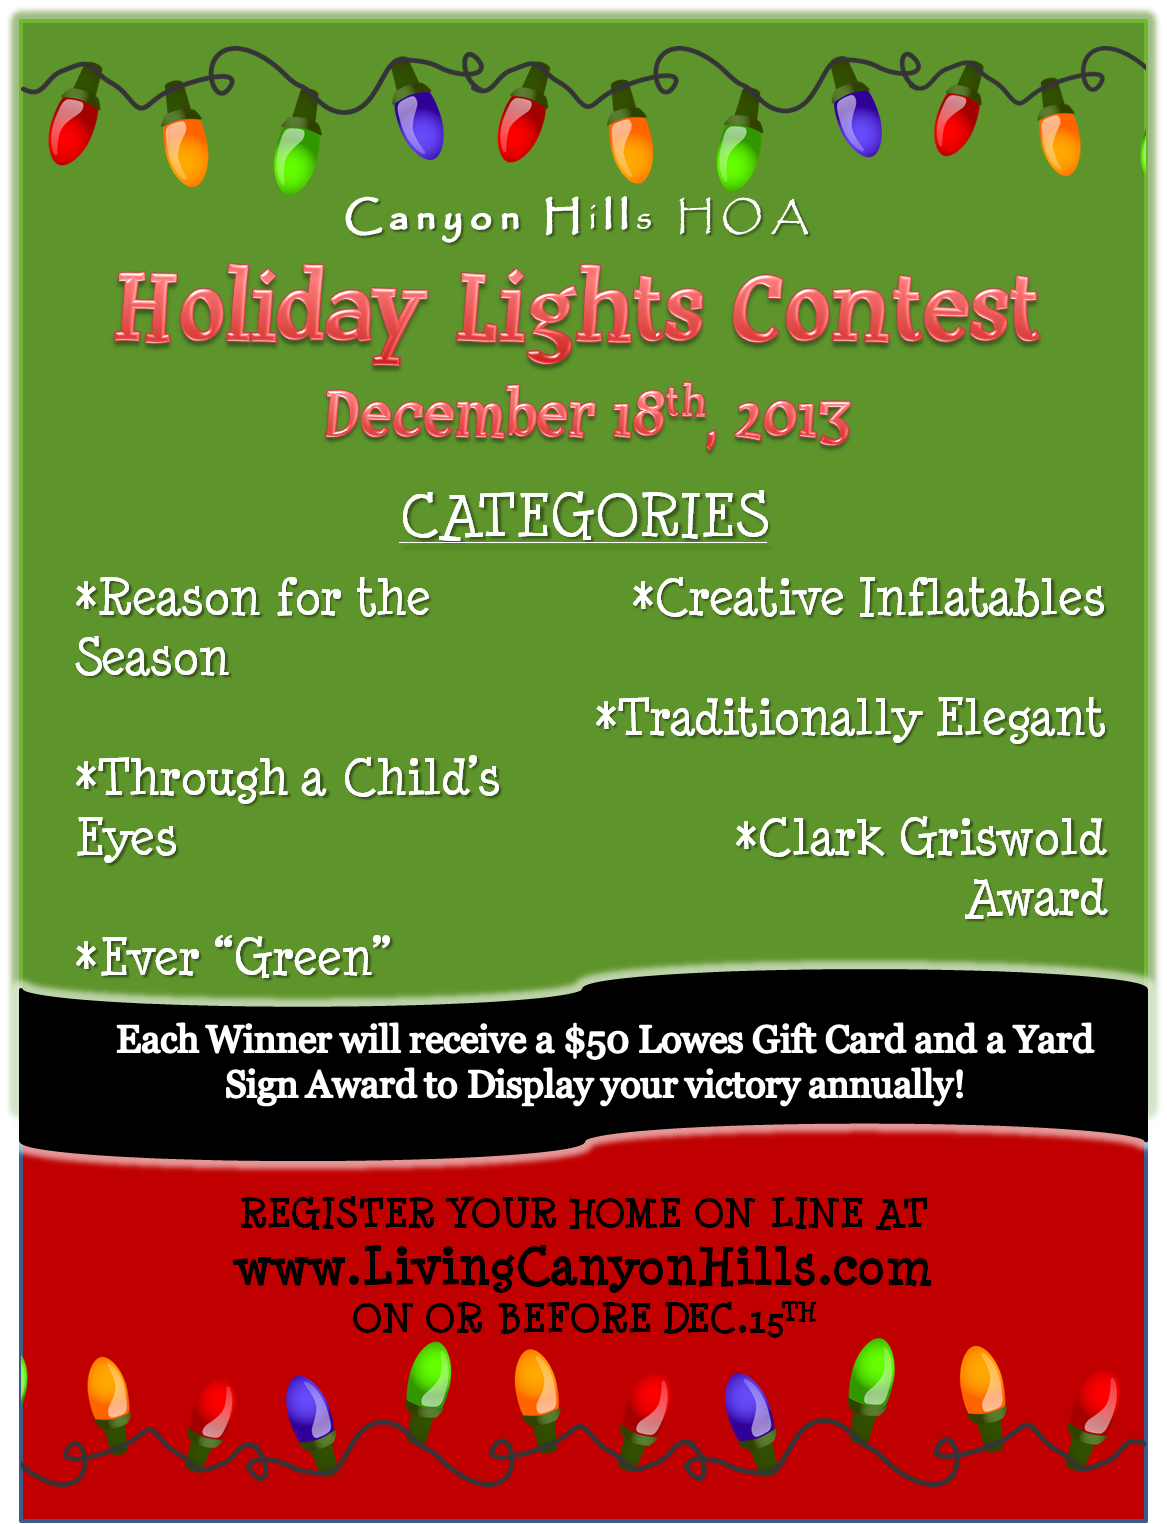 Living Canyon Hills: Canyon Hills Annual Holiday Lights Contest